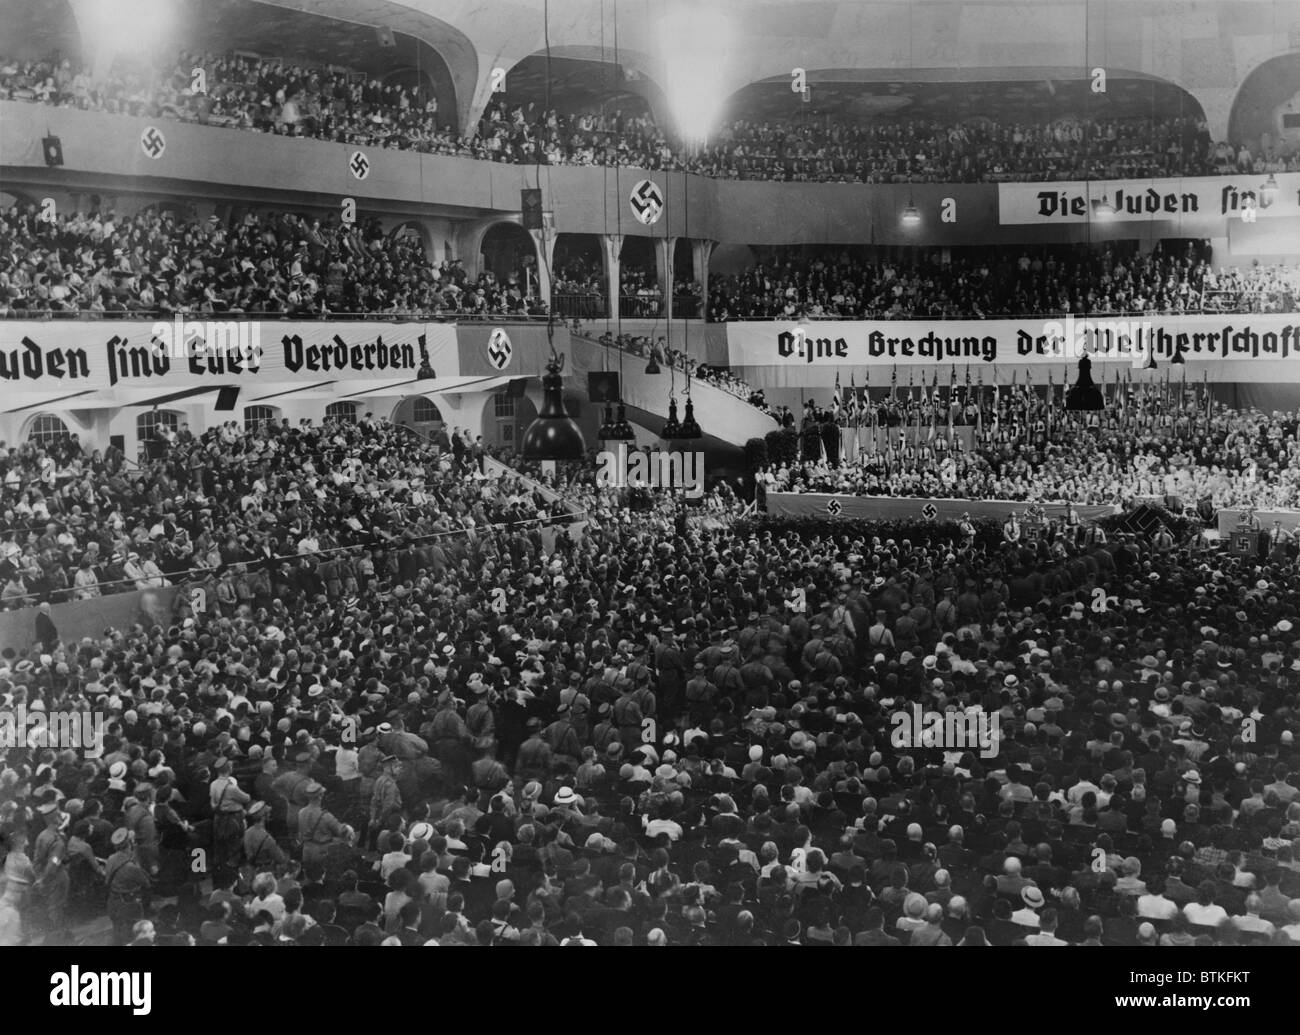 Anti-Semitic rally, with swastikas and anti-Semitic banners, at the massive auditorium of Sportpalast, Berlin, where Nazi propagandist, Julius Streicher, would speak on August 16, 1935. Within a month, Germany would adopt the Nuremberg Laws, stripping German Jews of their citizenship and civil rights. Stock Photo